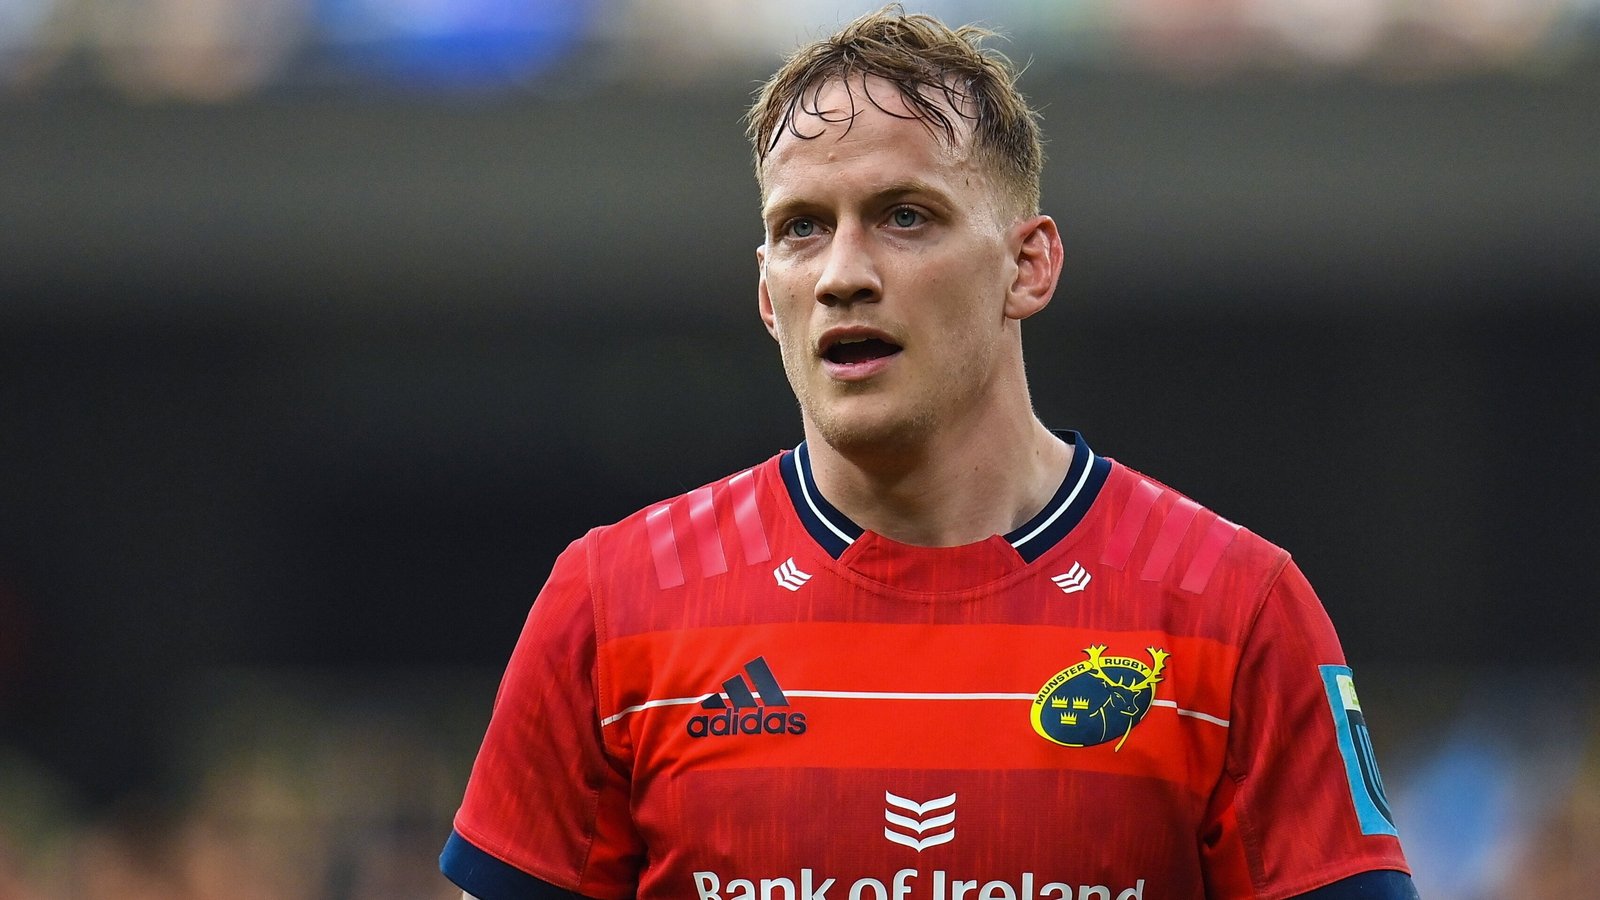 Haley and Salanoa give Munster double injury blow